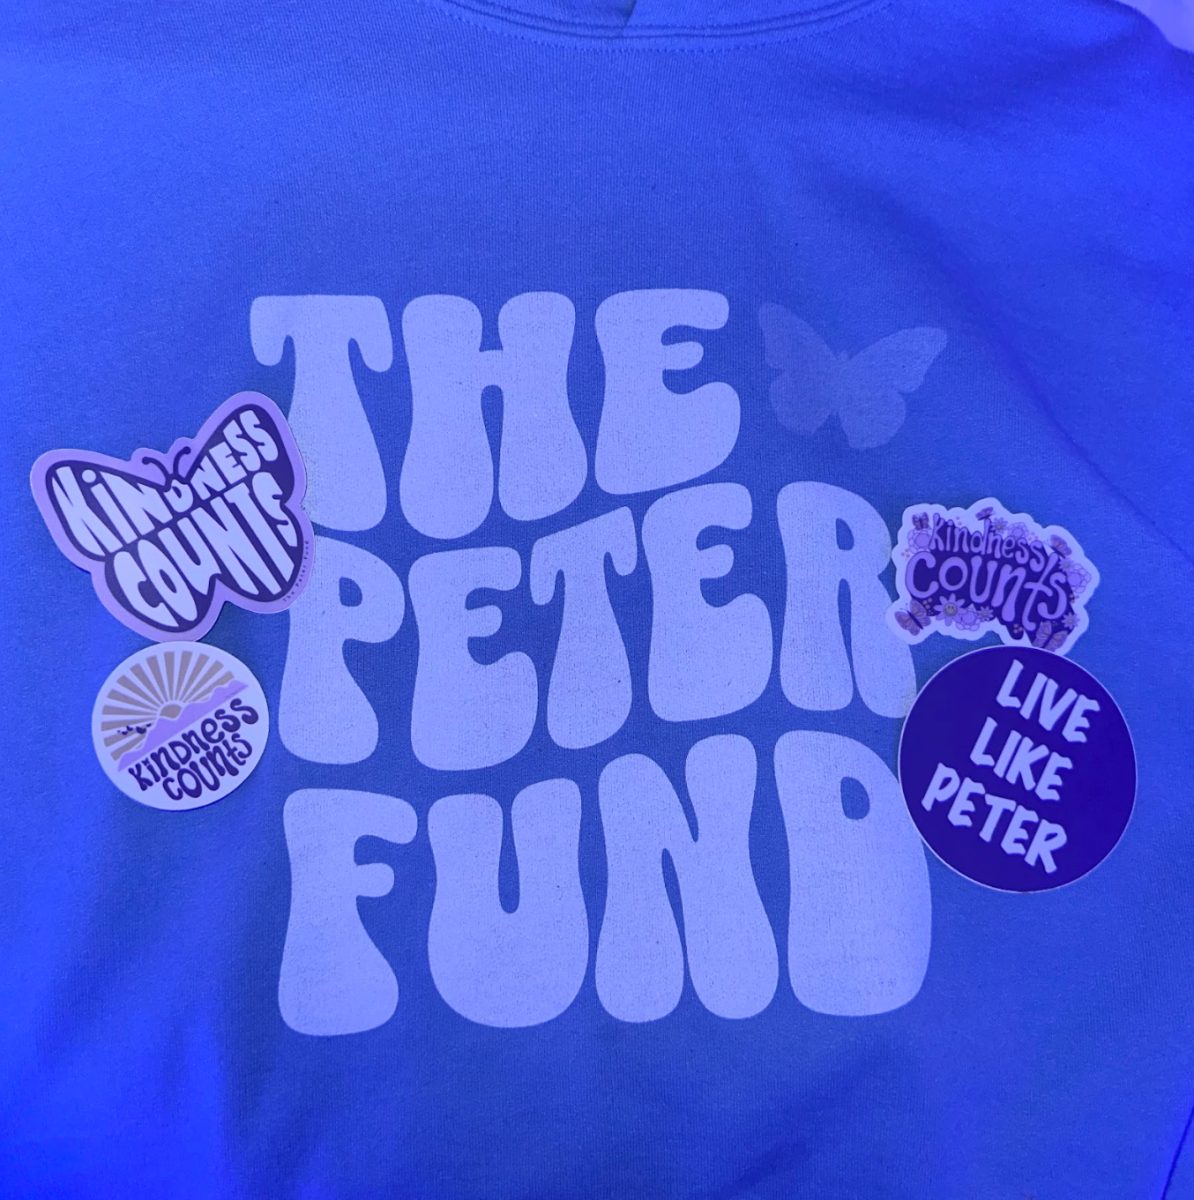 ThePeterFund%E2%80%99s+website+features+the+merchandise+they+have+for+purchase.